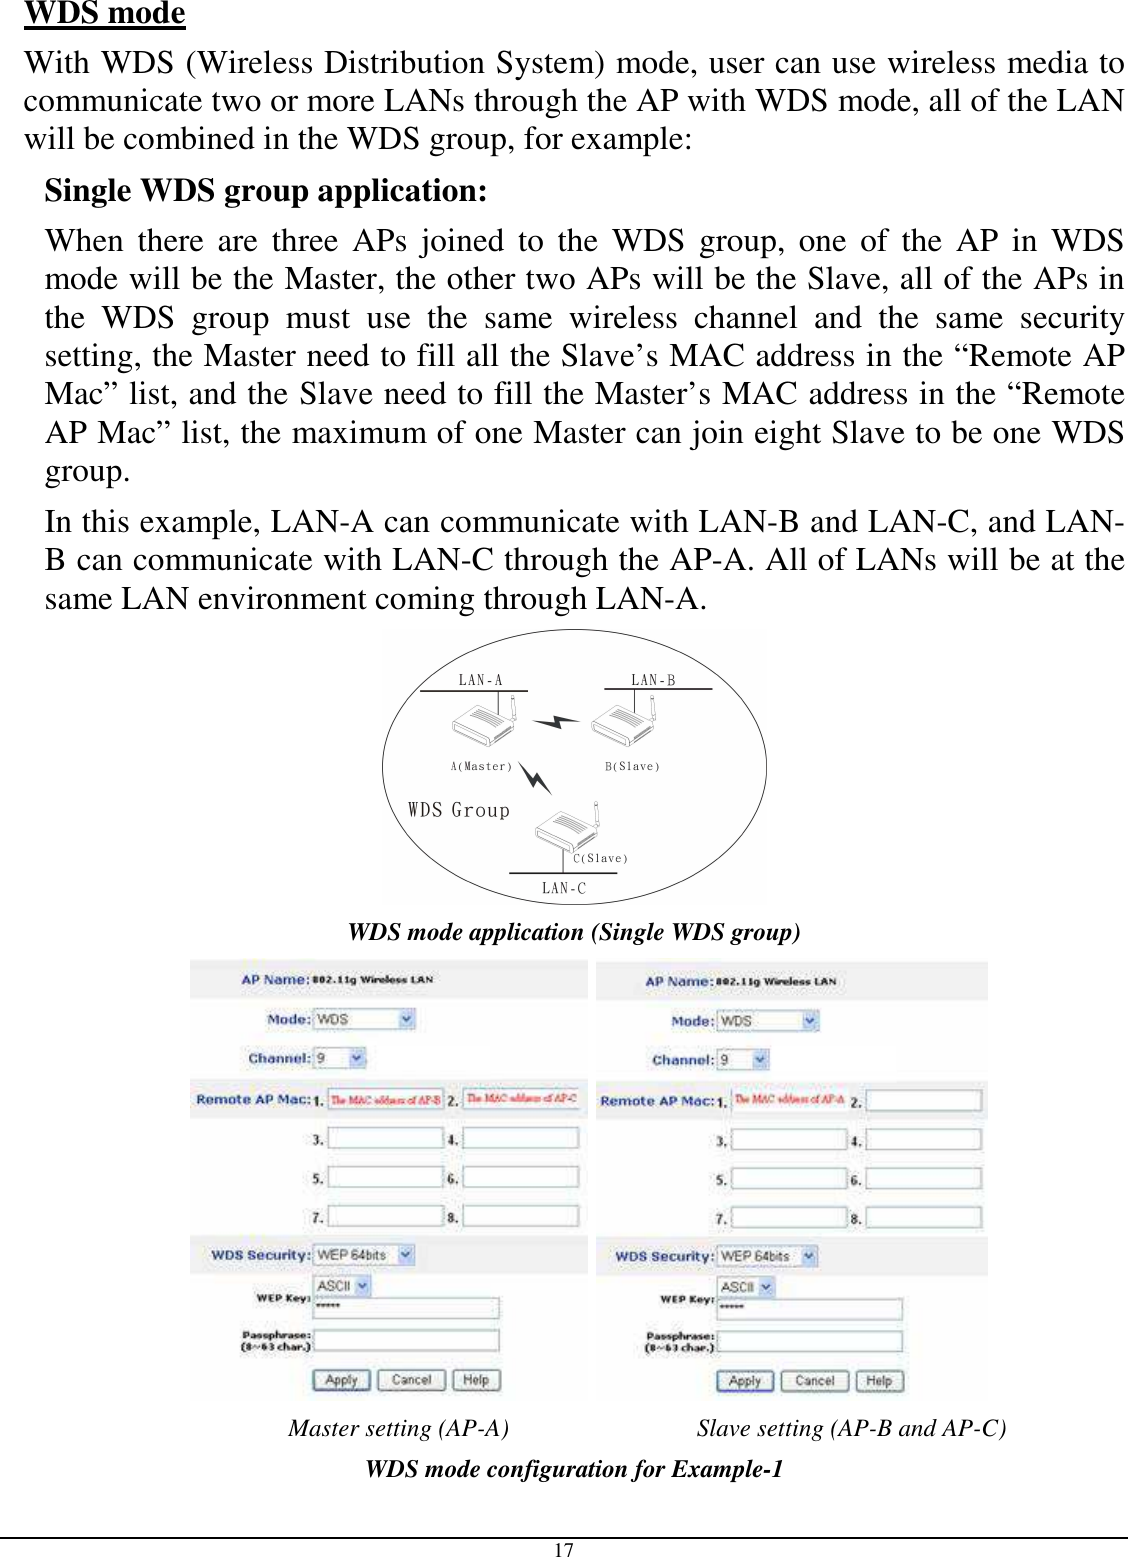  17 WDS mode  With WDS (Wireless Distribution System) mode, user can use wireless media to communicate two or more LANs through the AP with WDS mode, all of the LAN will be combined in the WDS group, for example: Single WDS group application: When  there  are  three  APs  joined  to  the  WDS  group,  one  of  the  AP  in  WDS mode will be the Master, the other two APs will be the Slave, all of the APs in the  WDS  group  must  use  the  same  wireless  channel  and  the  same  security setting, the Master need to fill all the Slave’s MAC address in the “Remote AP Mac” list, and the Slave need to fill the Master’s MAC address in the “Remote AP Mac” list, the maximum of one Master can join eight Slave to be one WDS group. In this example, LAN-A can communicate with LAN-B and LAN-C, and LAN-B can communicate with LAN-C through the AP-A. All of LANs will be at the same LAN environment coming through LAN-A.  WDS mode application (Single WDS group)       Master setting (AP-A)                              Slave setting (AP-B and AP-C) WDS mode configuration for Example-1 